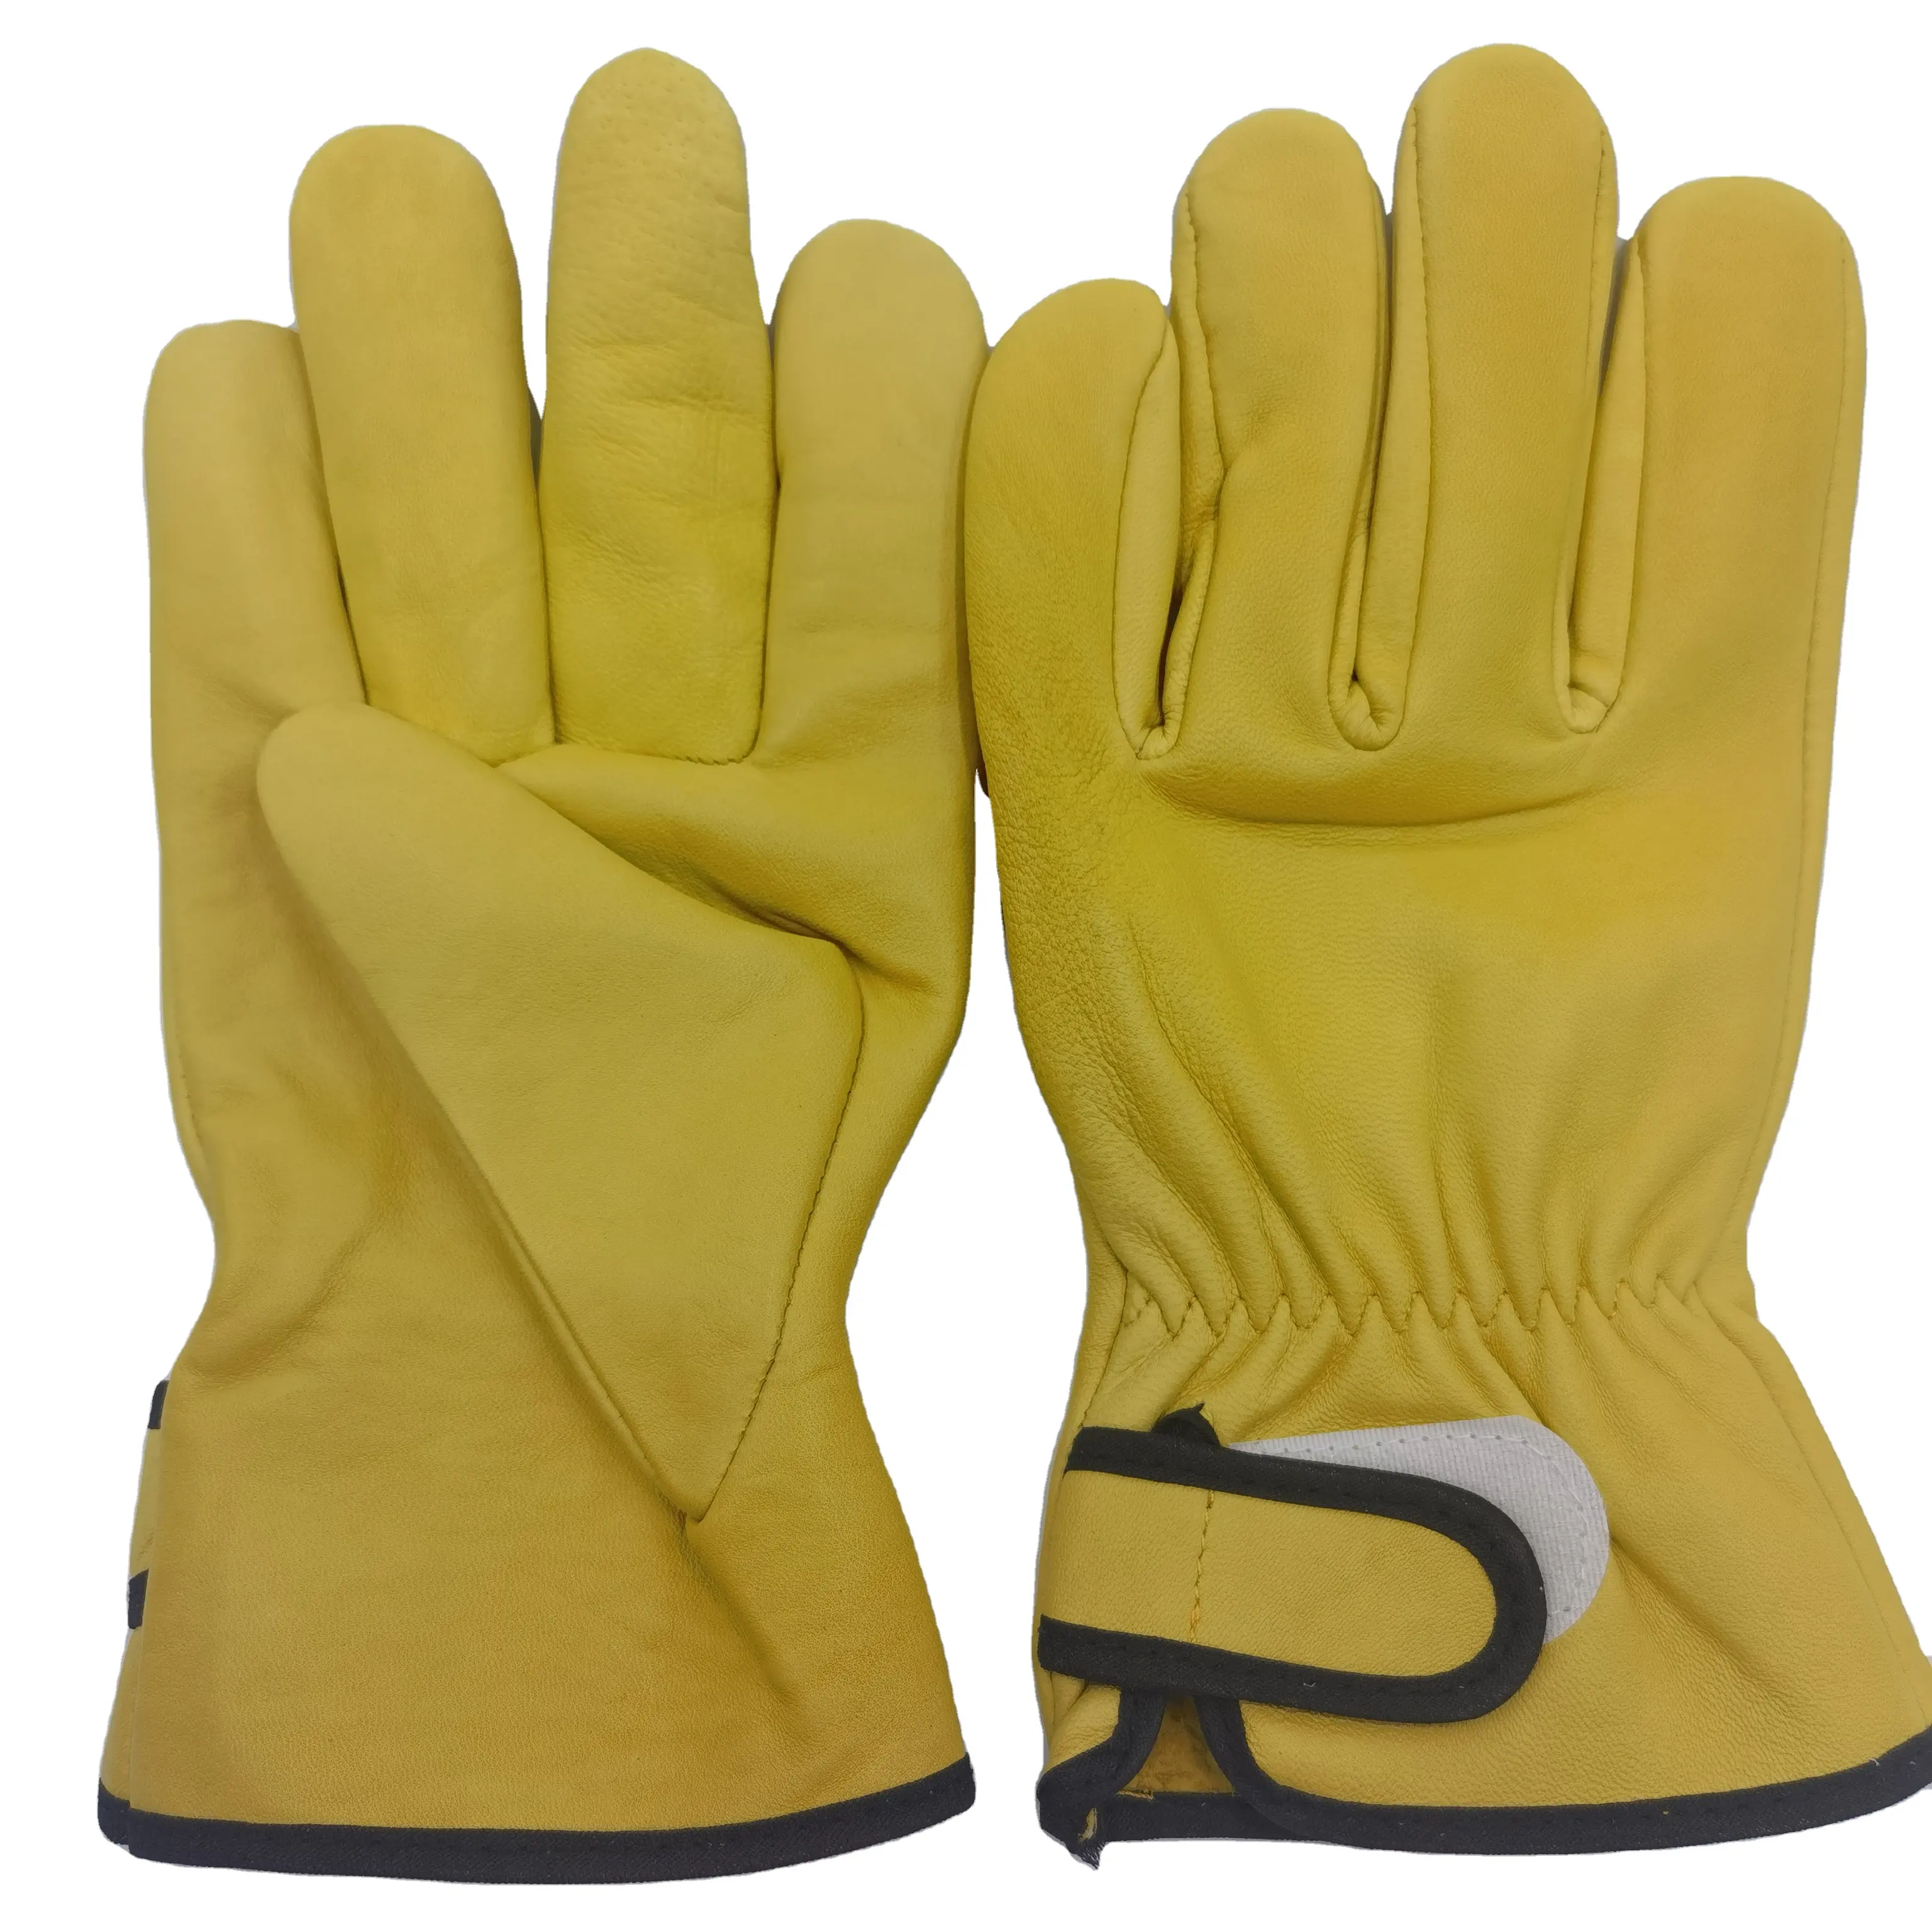 Winter Leather Work Gloves Warm 3m Thinsulate Lining for Cold Weather Work Thermal Insulated Gloves